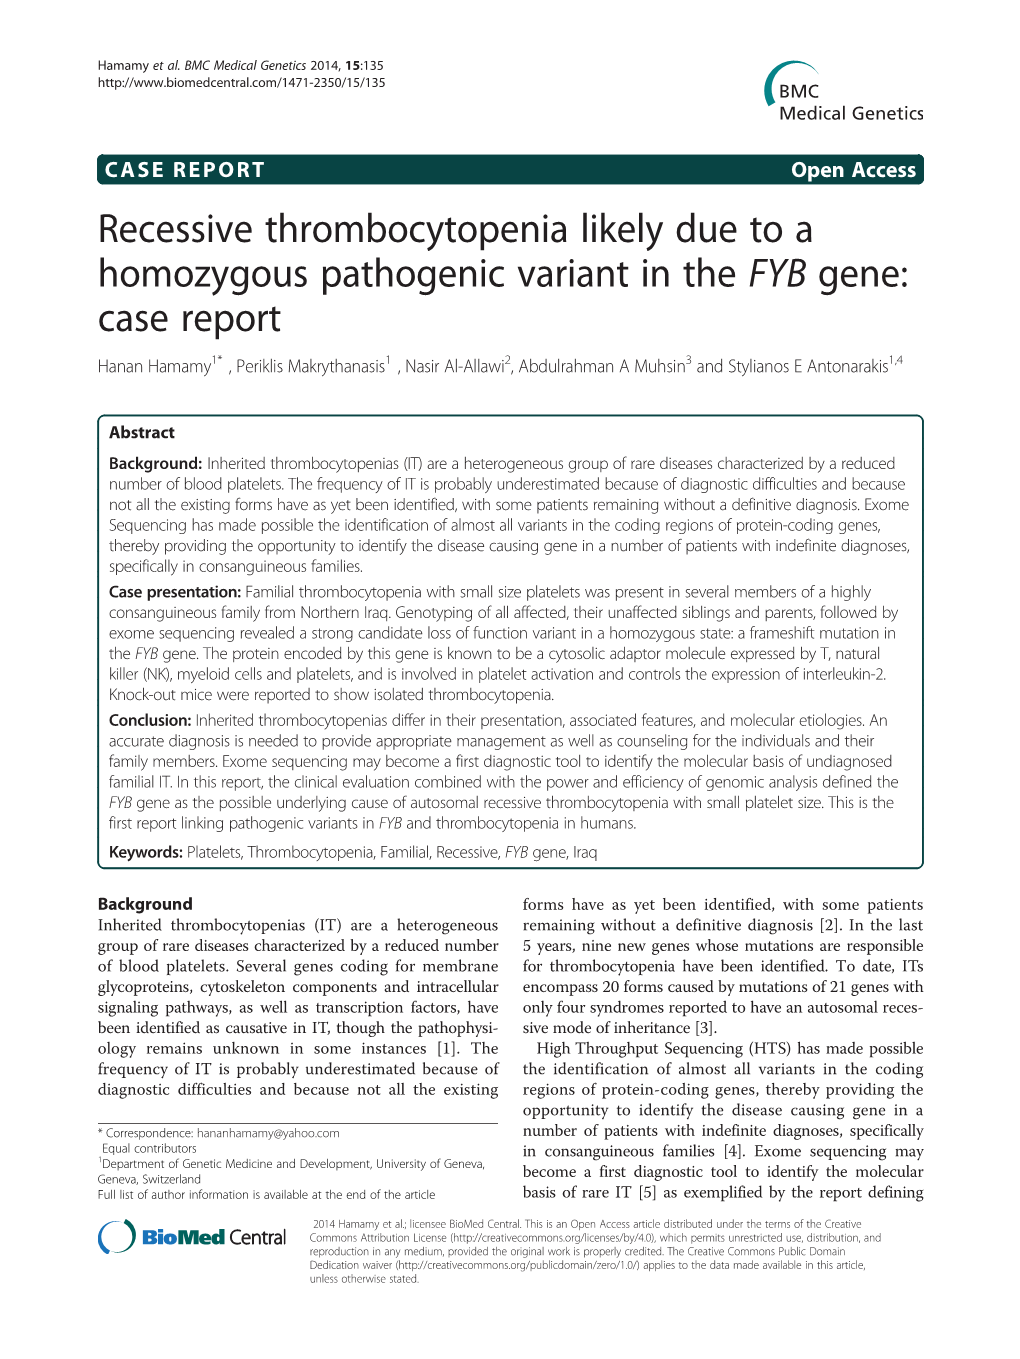 Recessive Thrombocytopenia Likely Due to a Homozygous